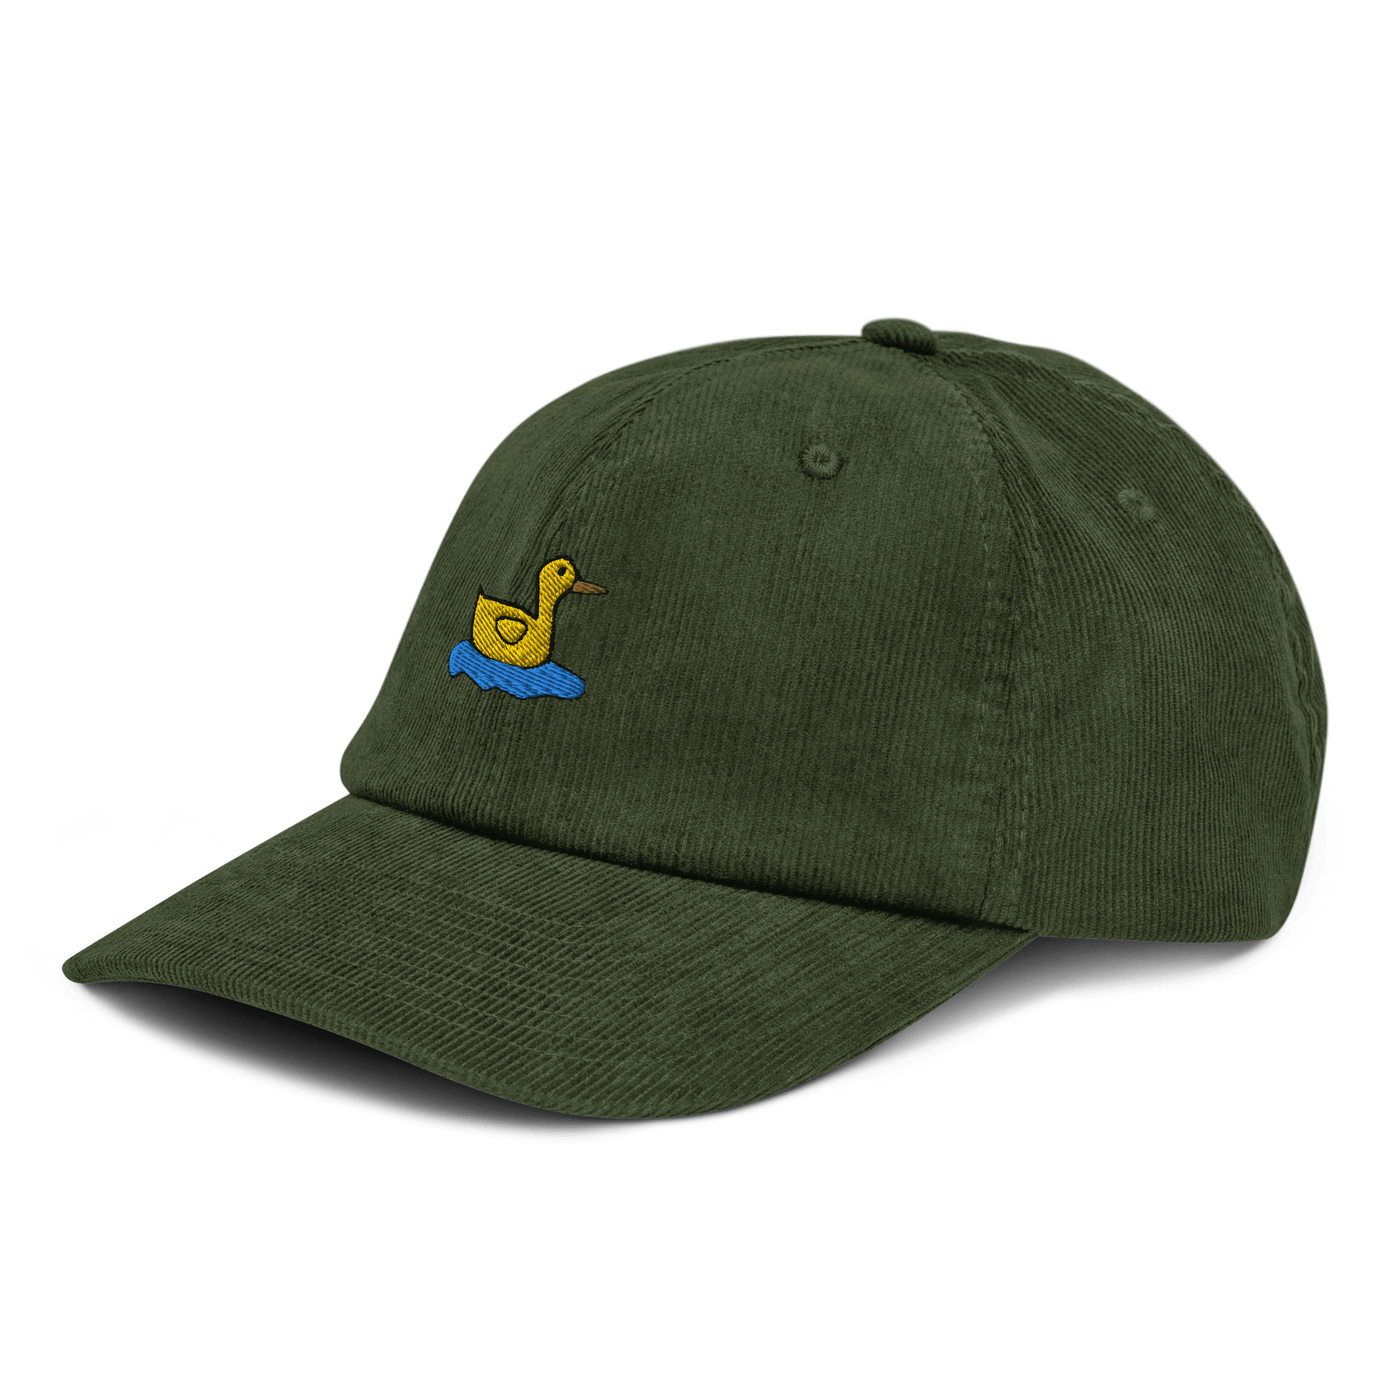 Lonely Duck Corduroy hat - Dark Olive - - Just Another Cap Store